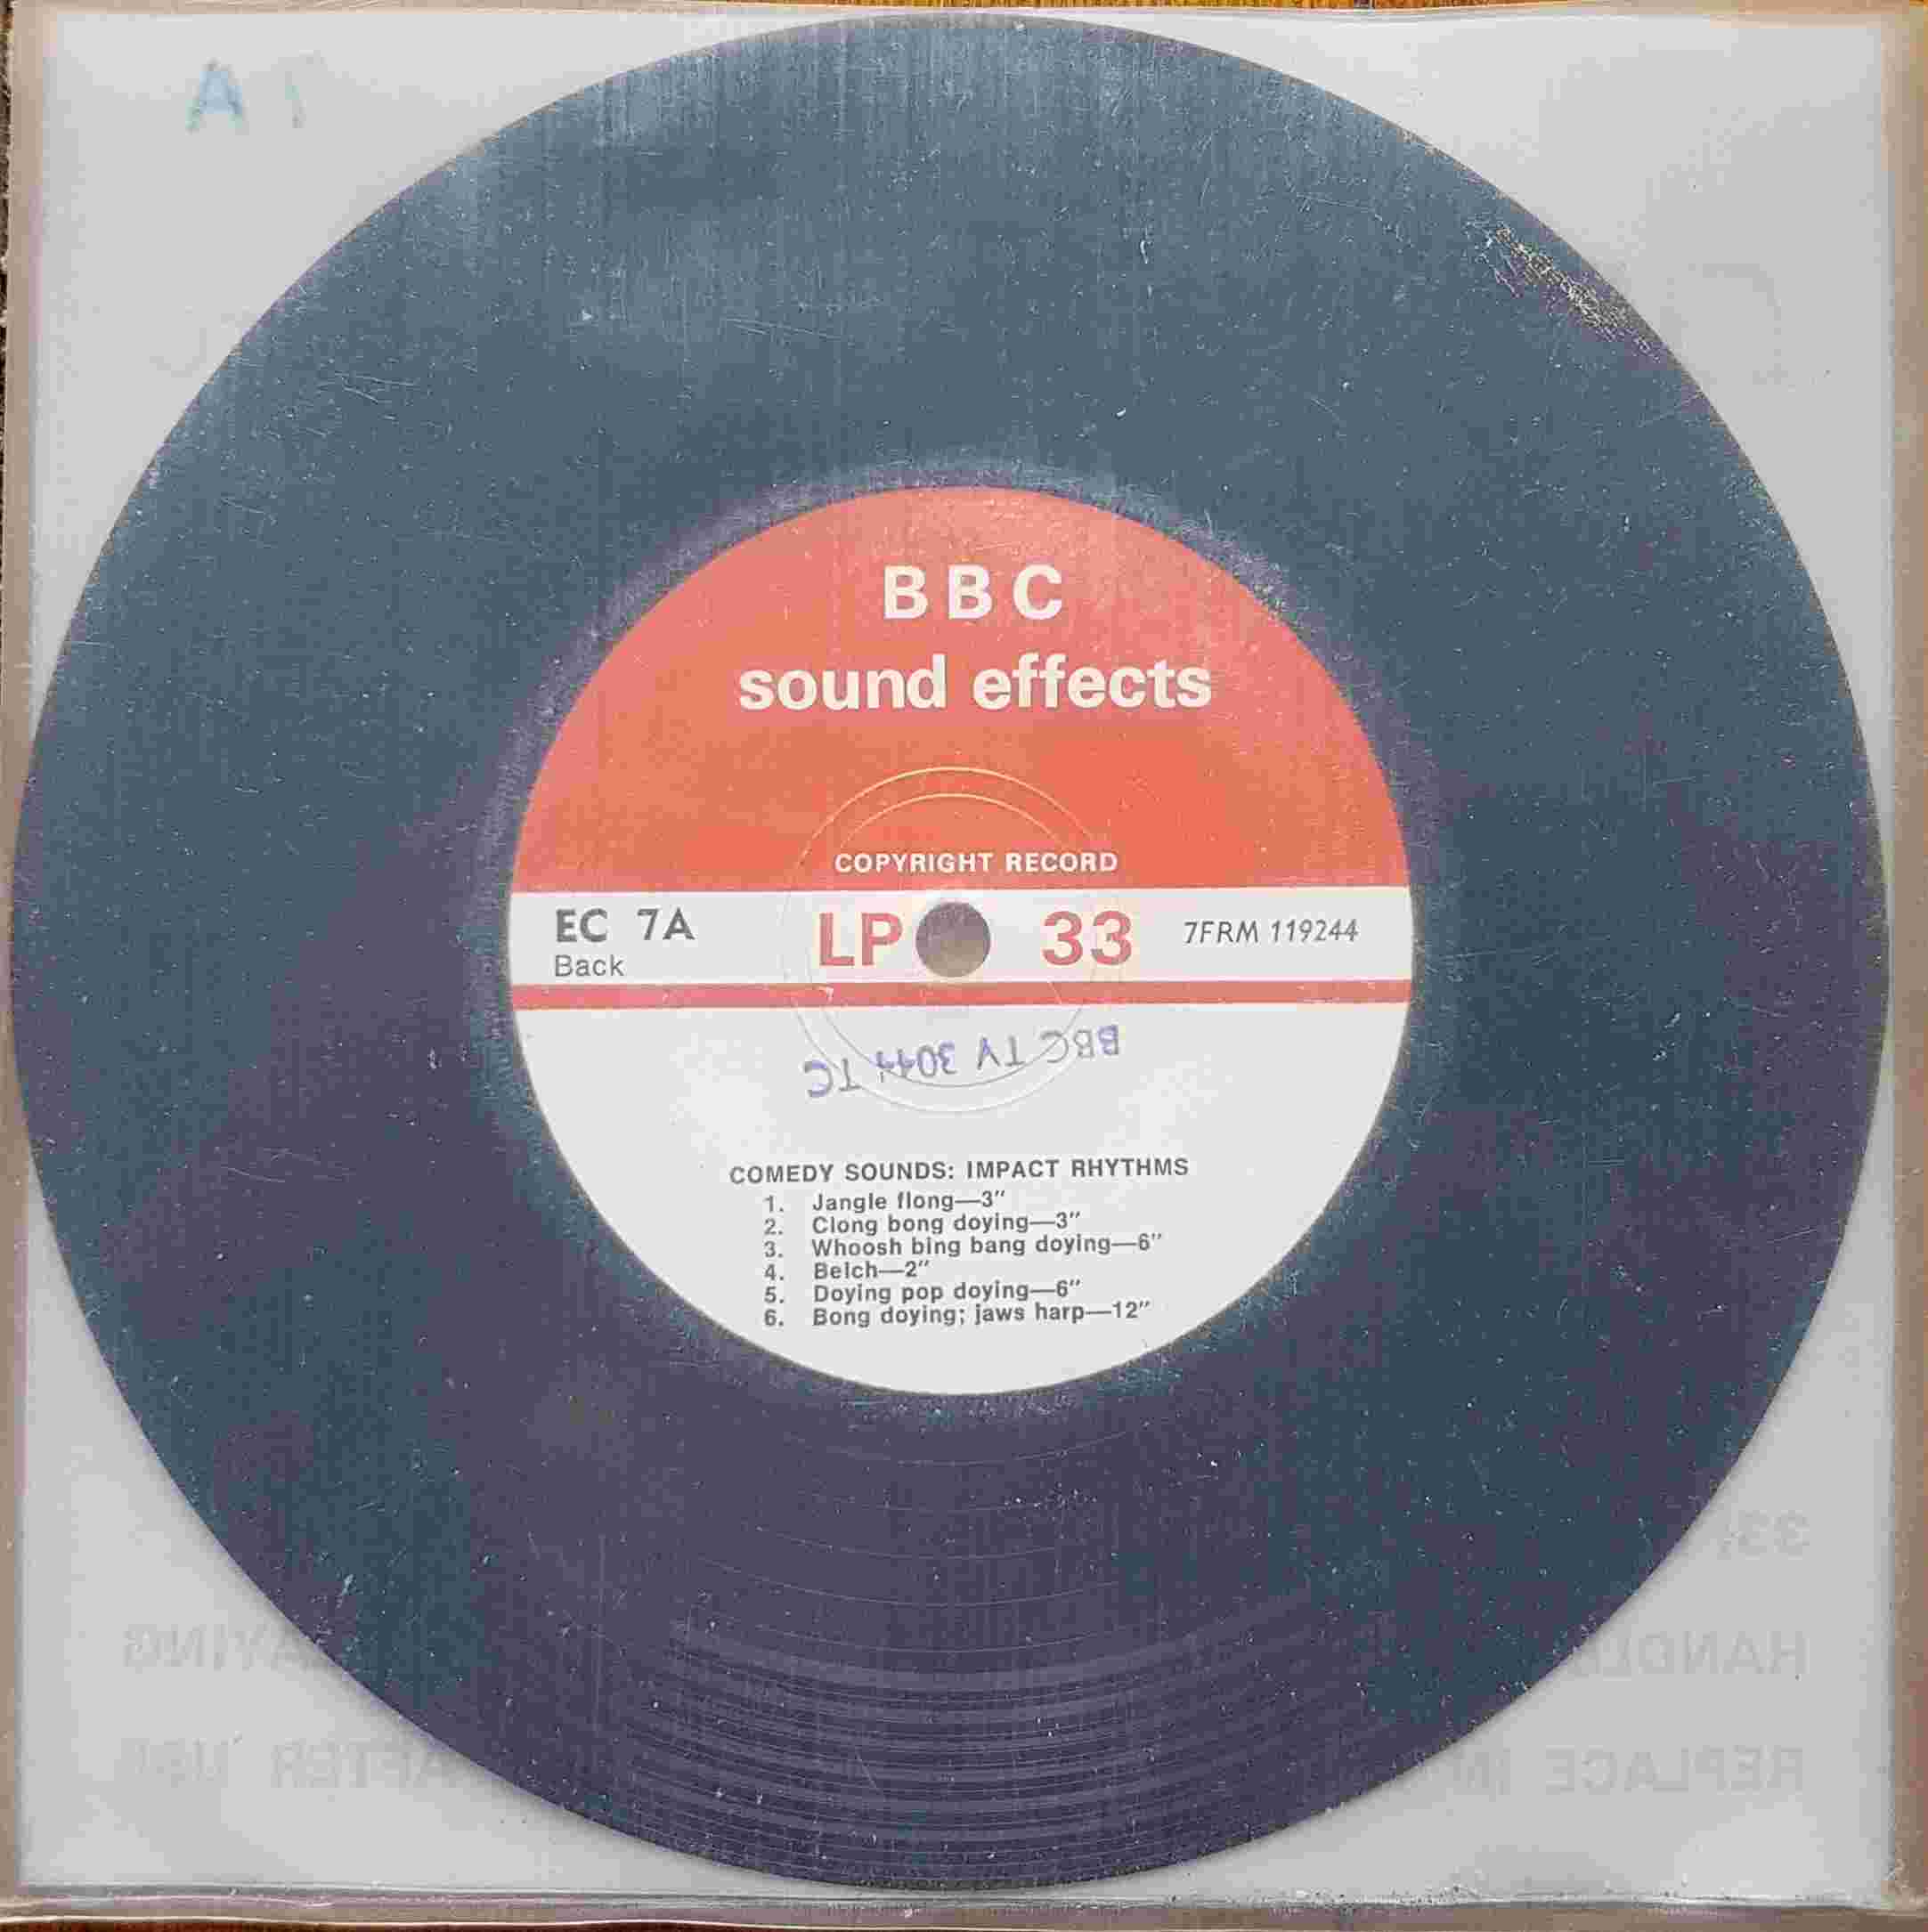 Picture of EC 7A Comedy sounds: Impact rhythms by artist Not registered from the BBC records and Tapes library